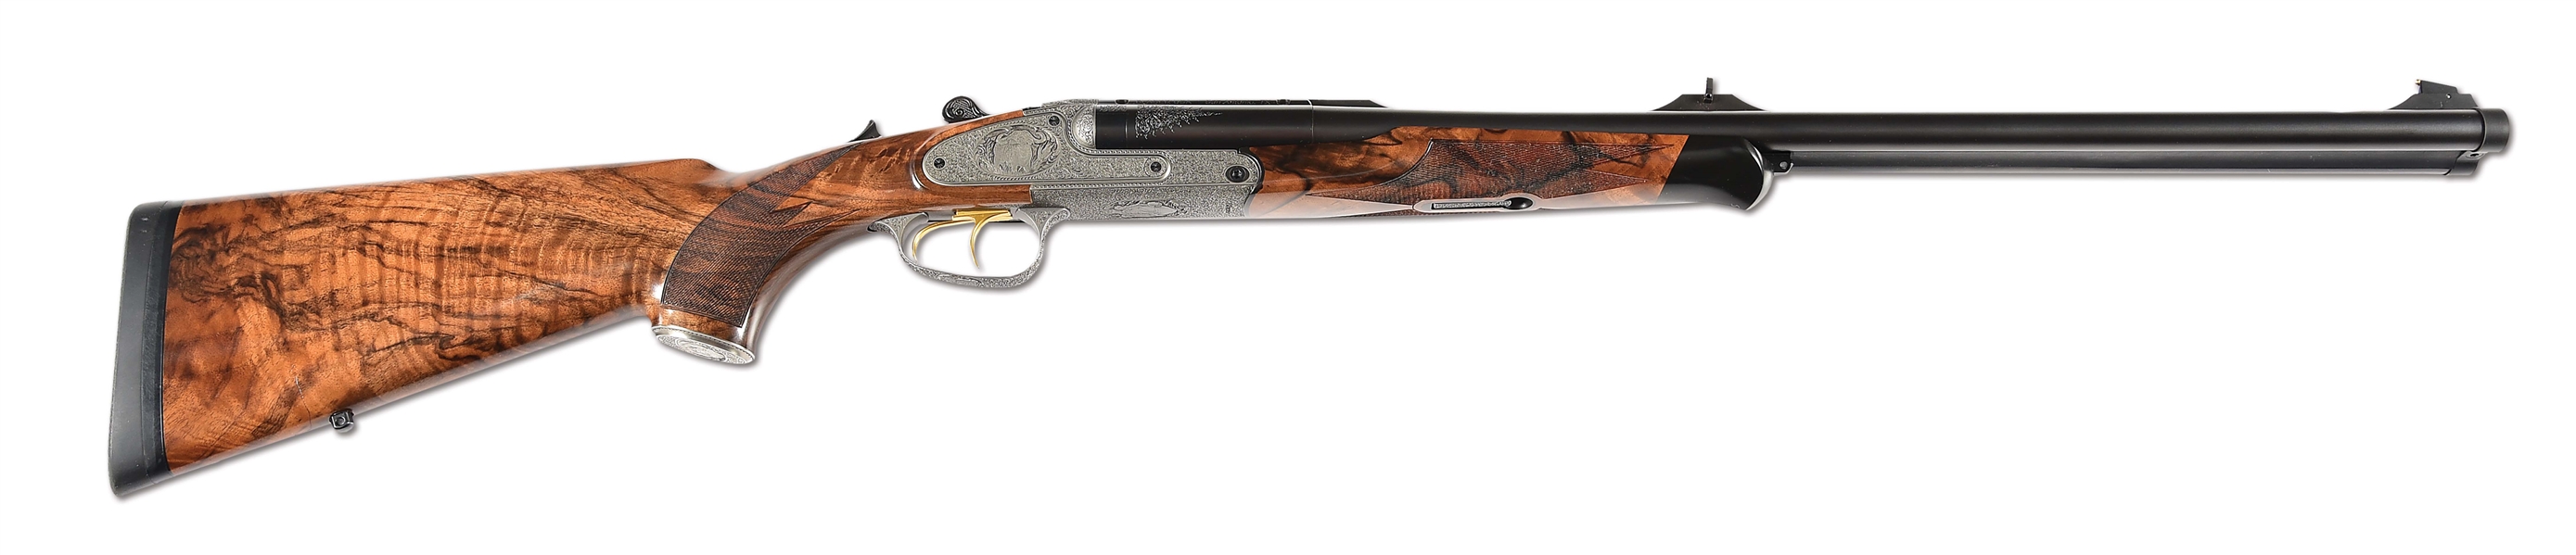 (M) STUNNING BLASER S2 "SUPER LUXUS" LIMITED "BIG FIVE" DOUBLE RIFLE IN .500/416 NITRO EXPRESS - NO. 1 OF 10.